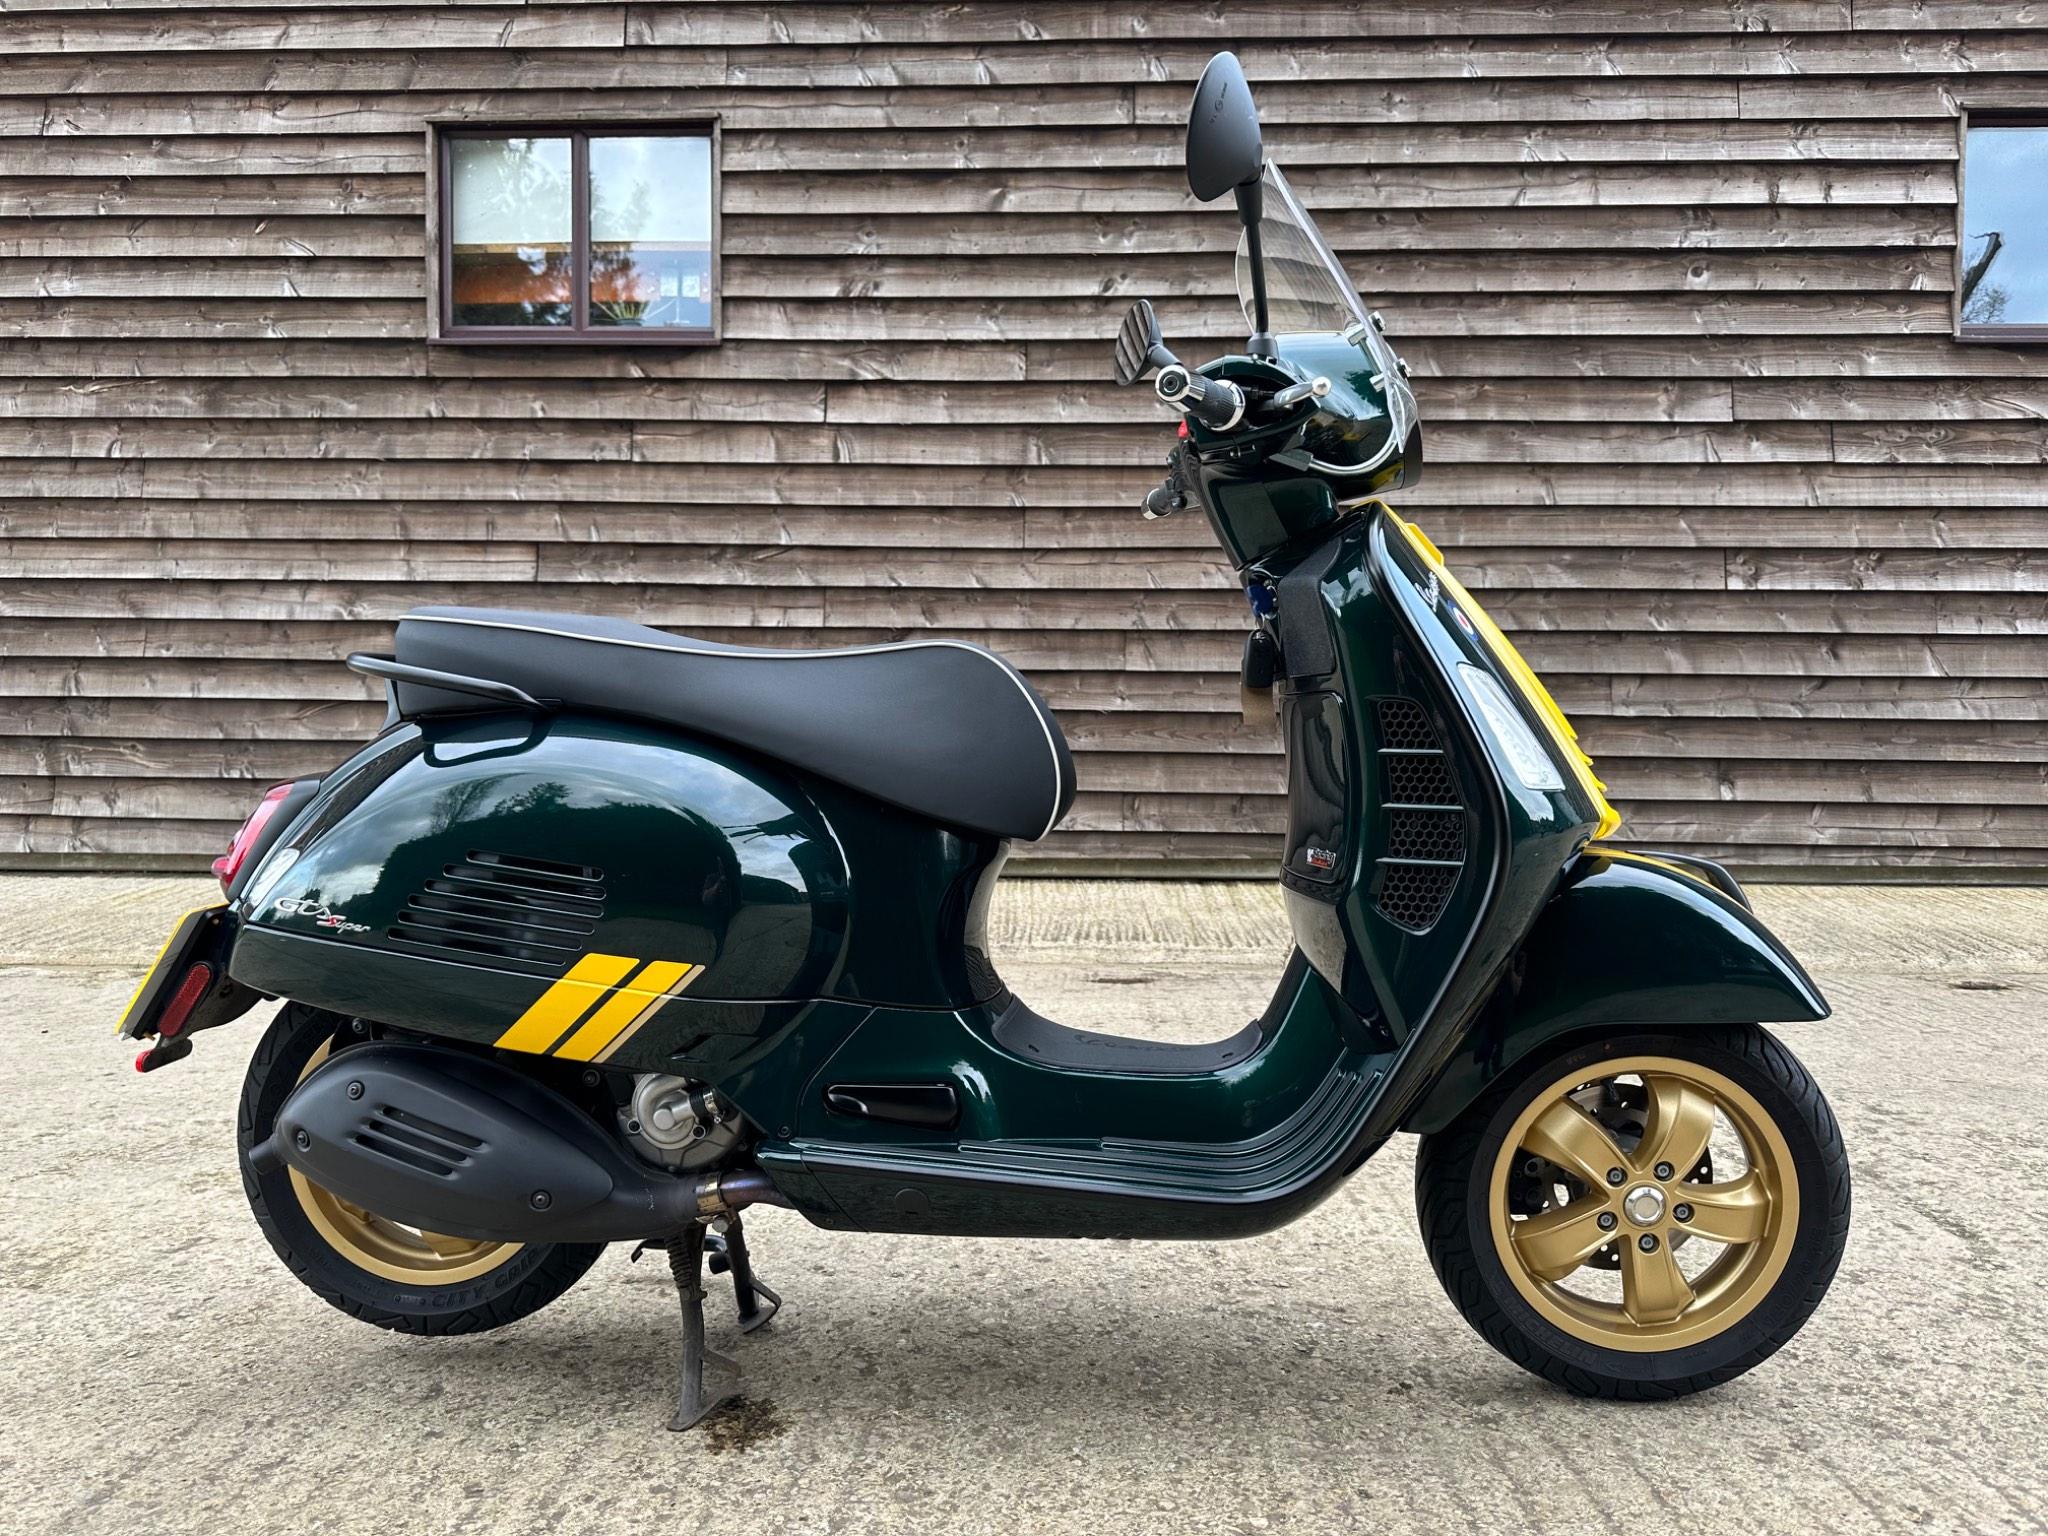 2022 Piaggio Vespa GTS 300 hpe Super Racing Sixties ABS From £74.49 per month 